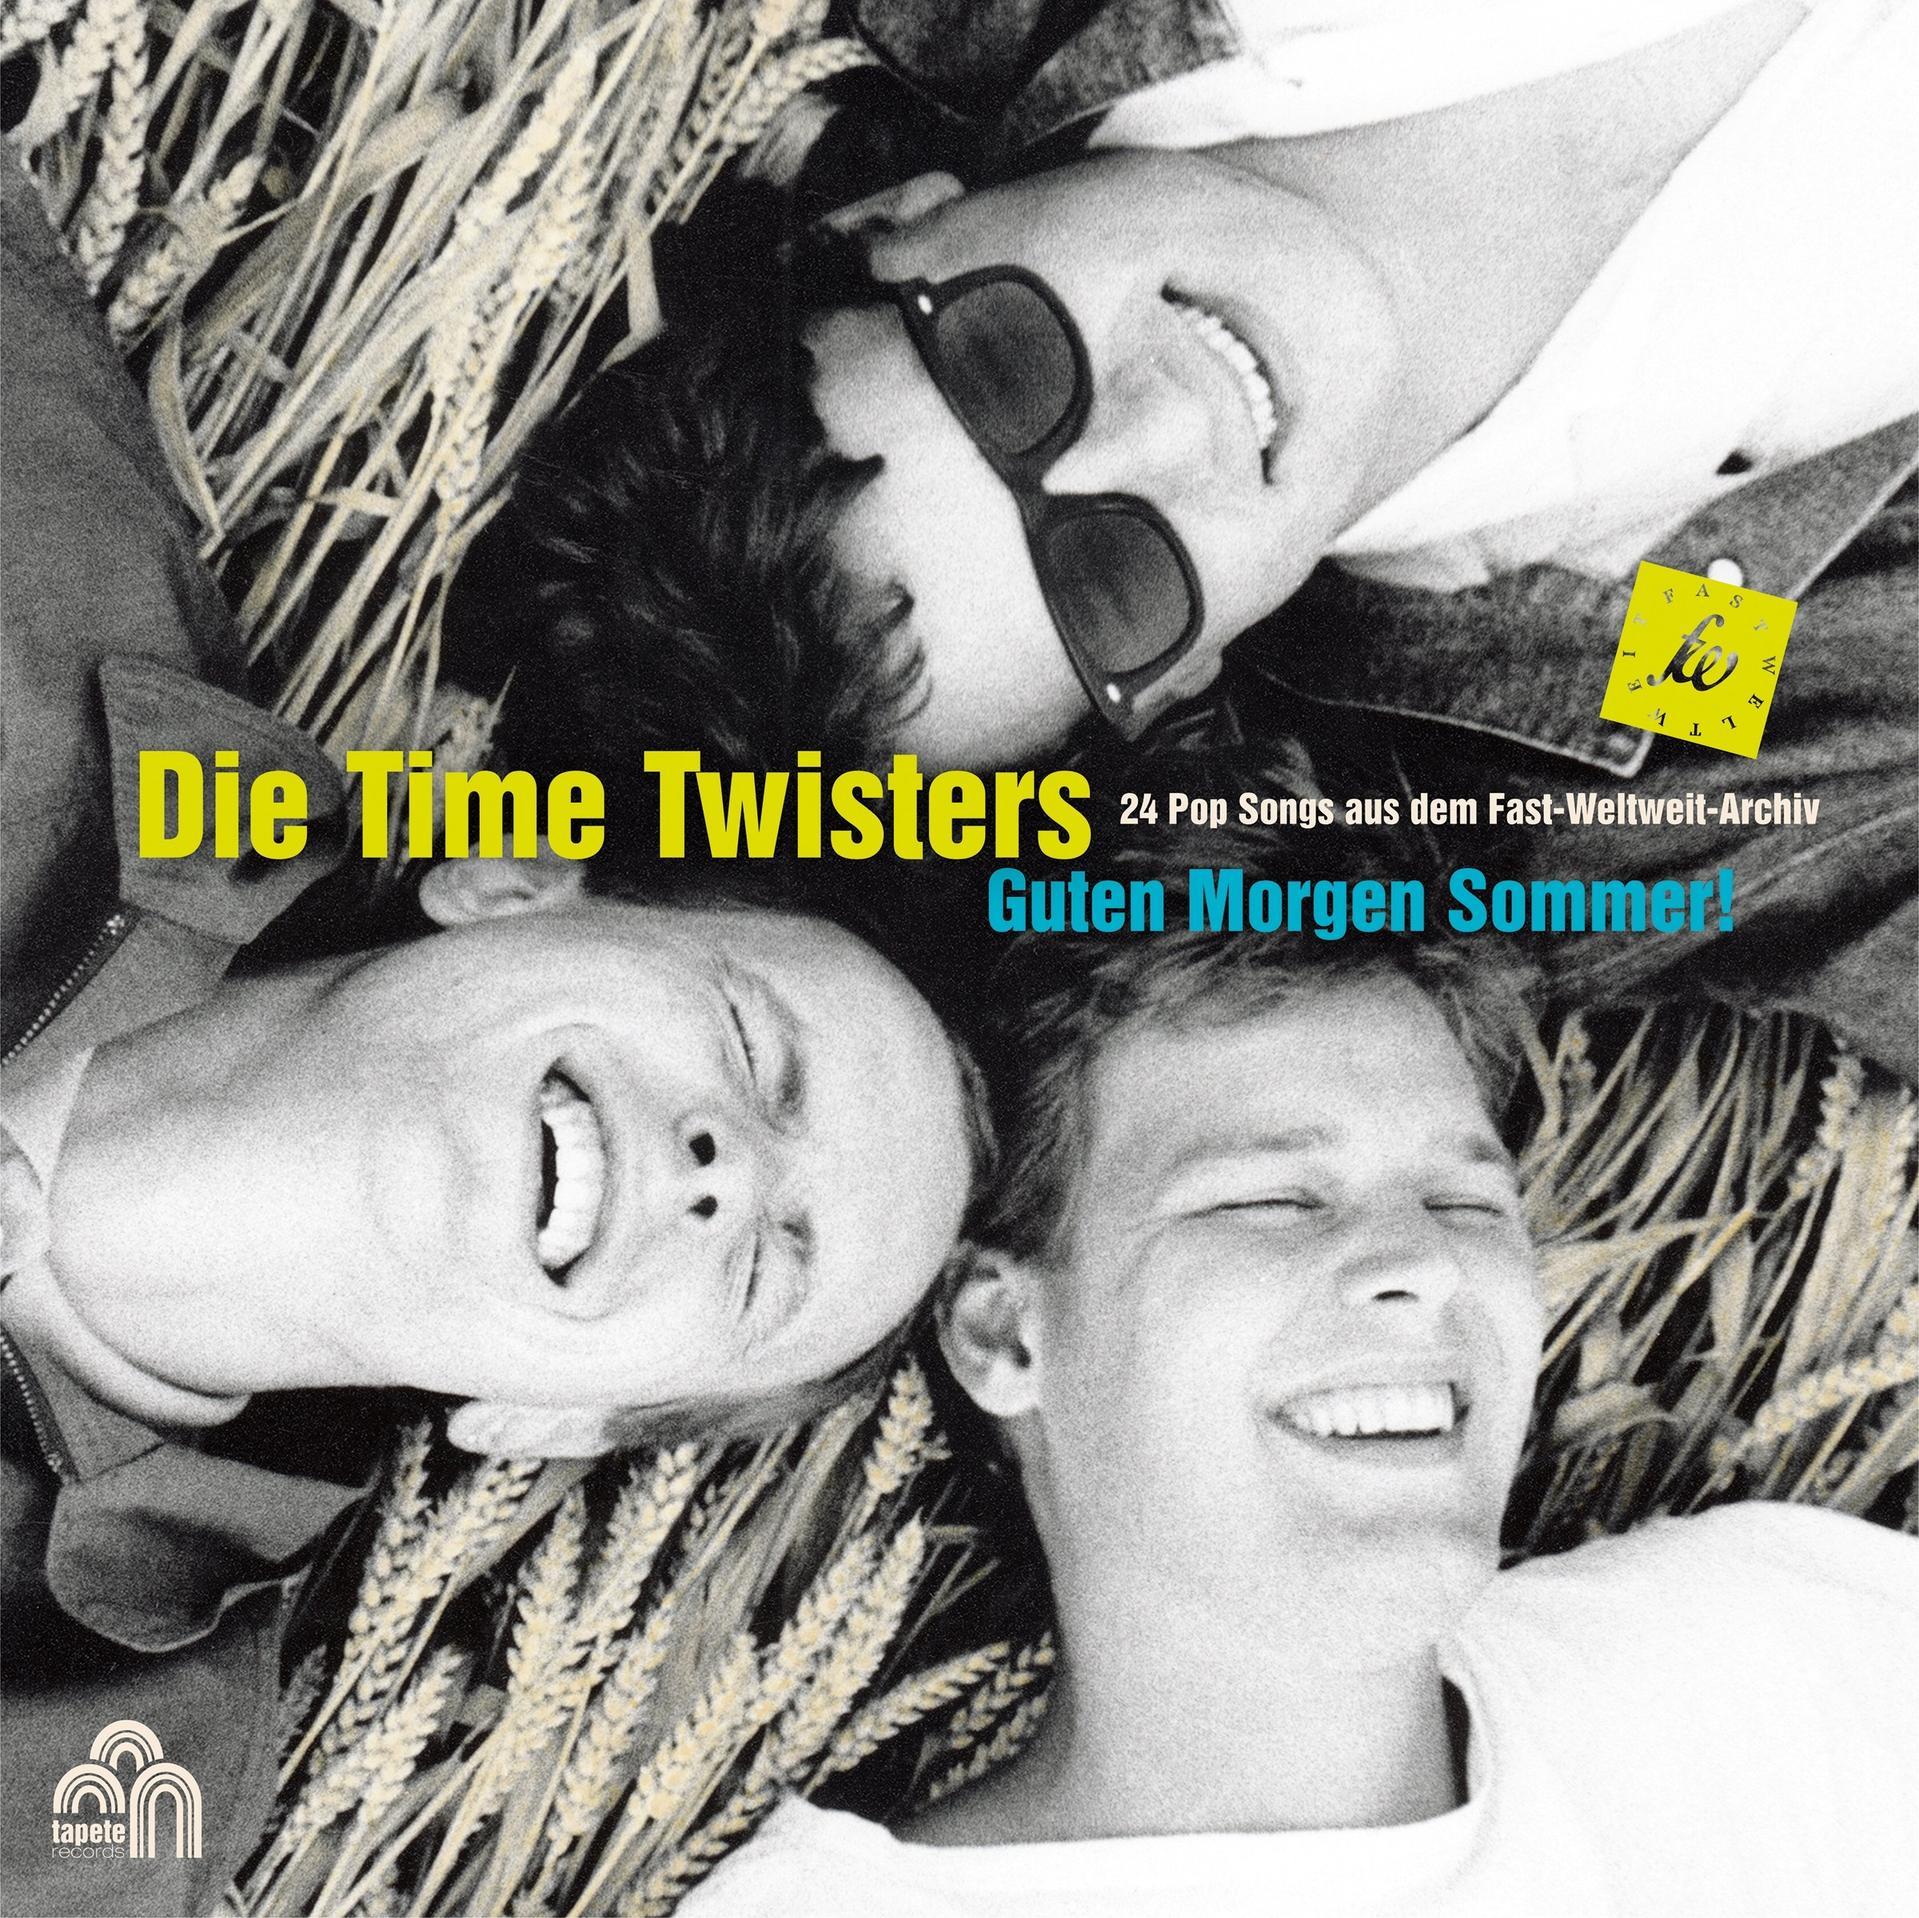 Time Twisters - Guten Morgen Die (The Best (CD) Of - Sommer Time Twisters